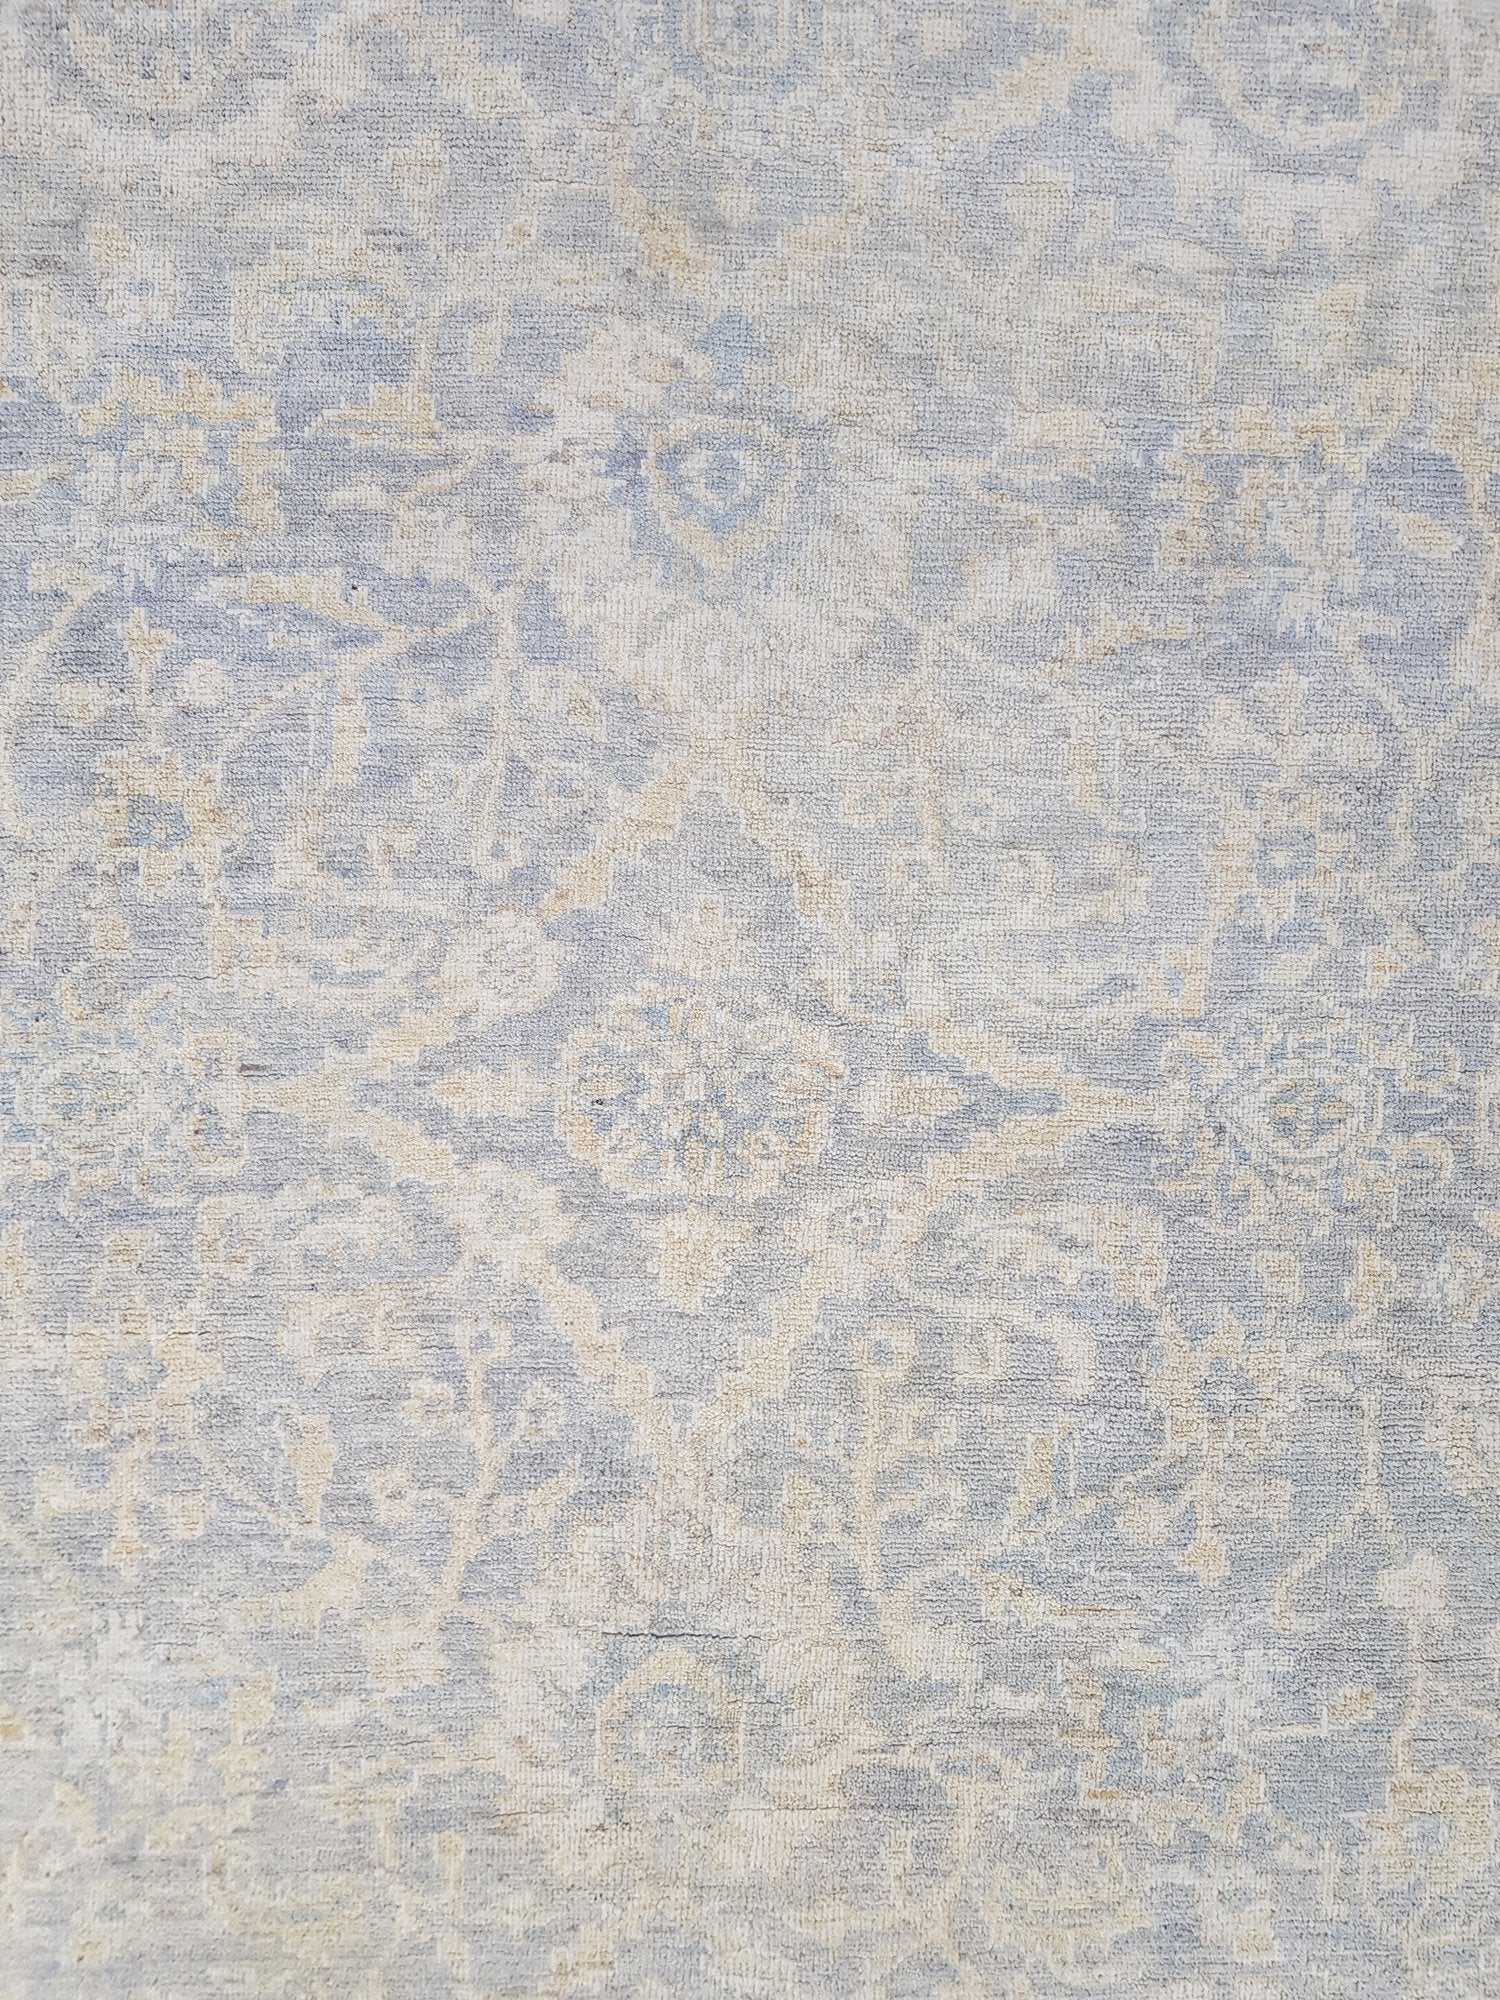 Sultanabad Handwoven Transitional Rug, J64034